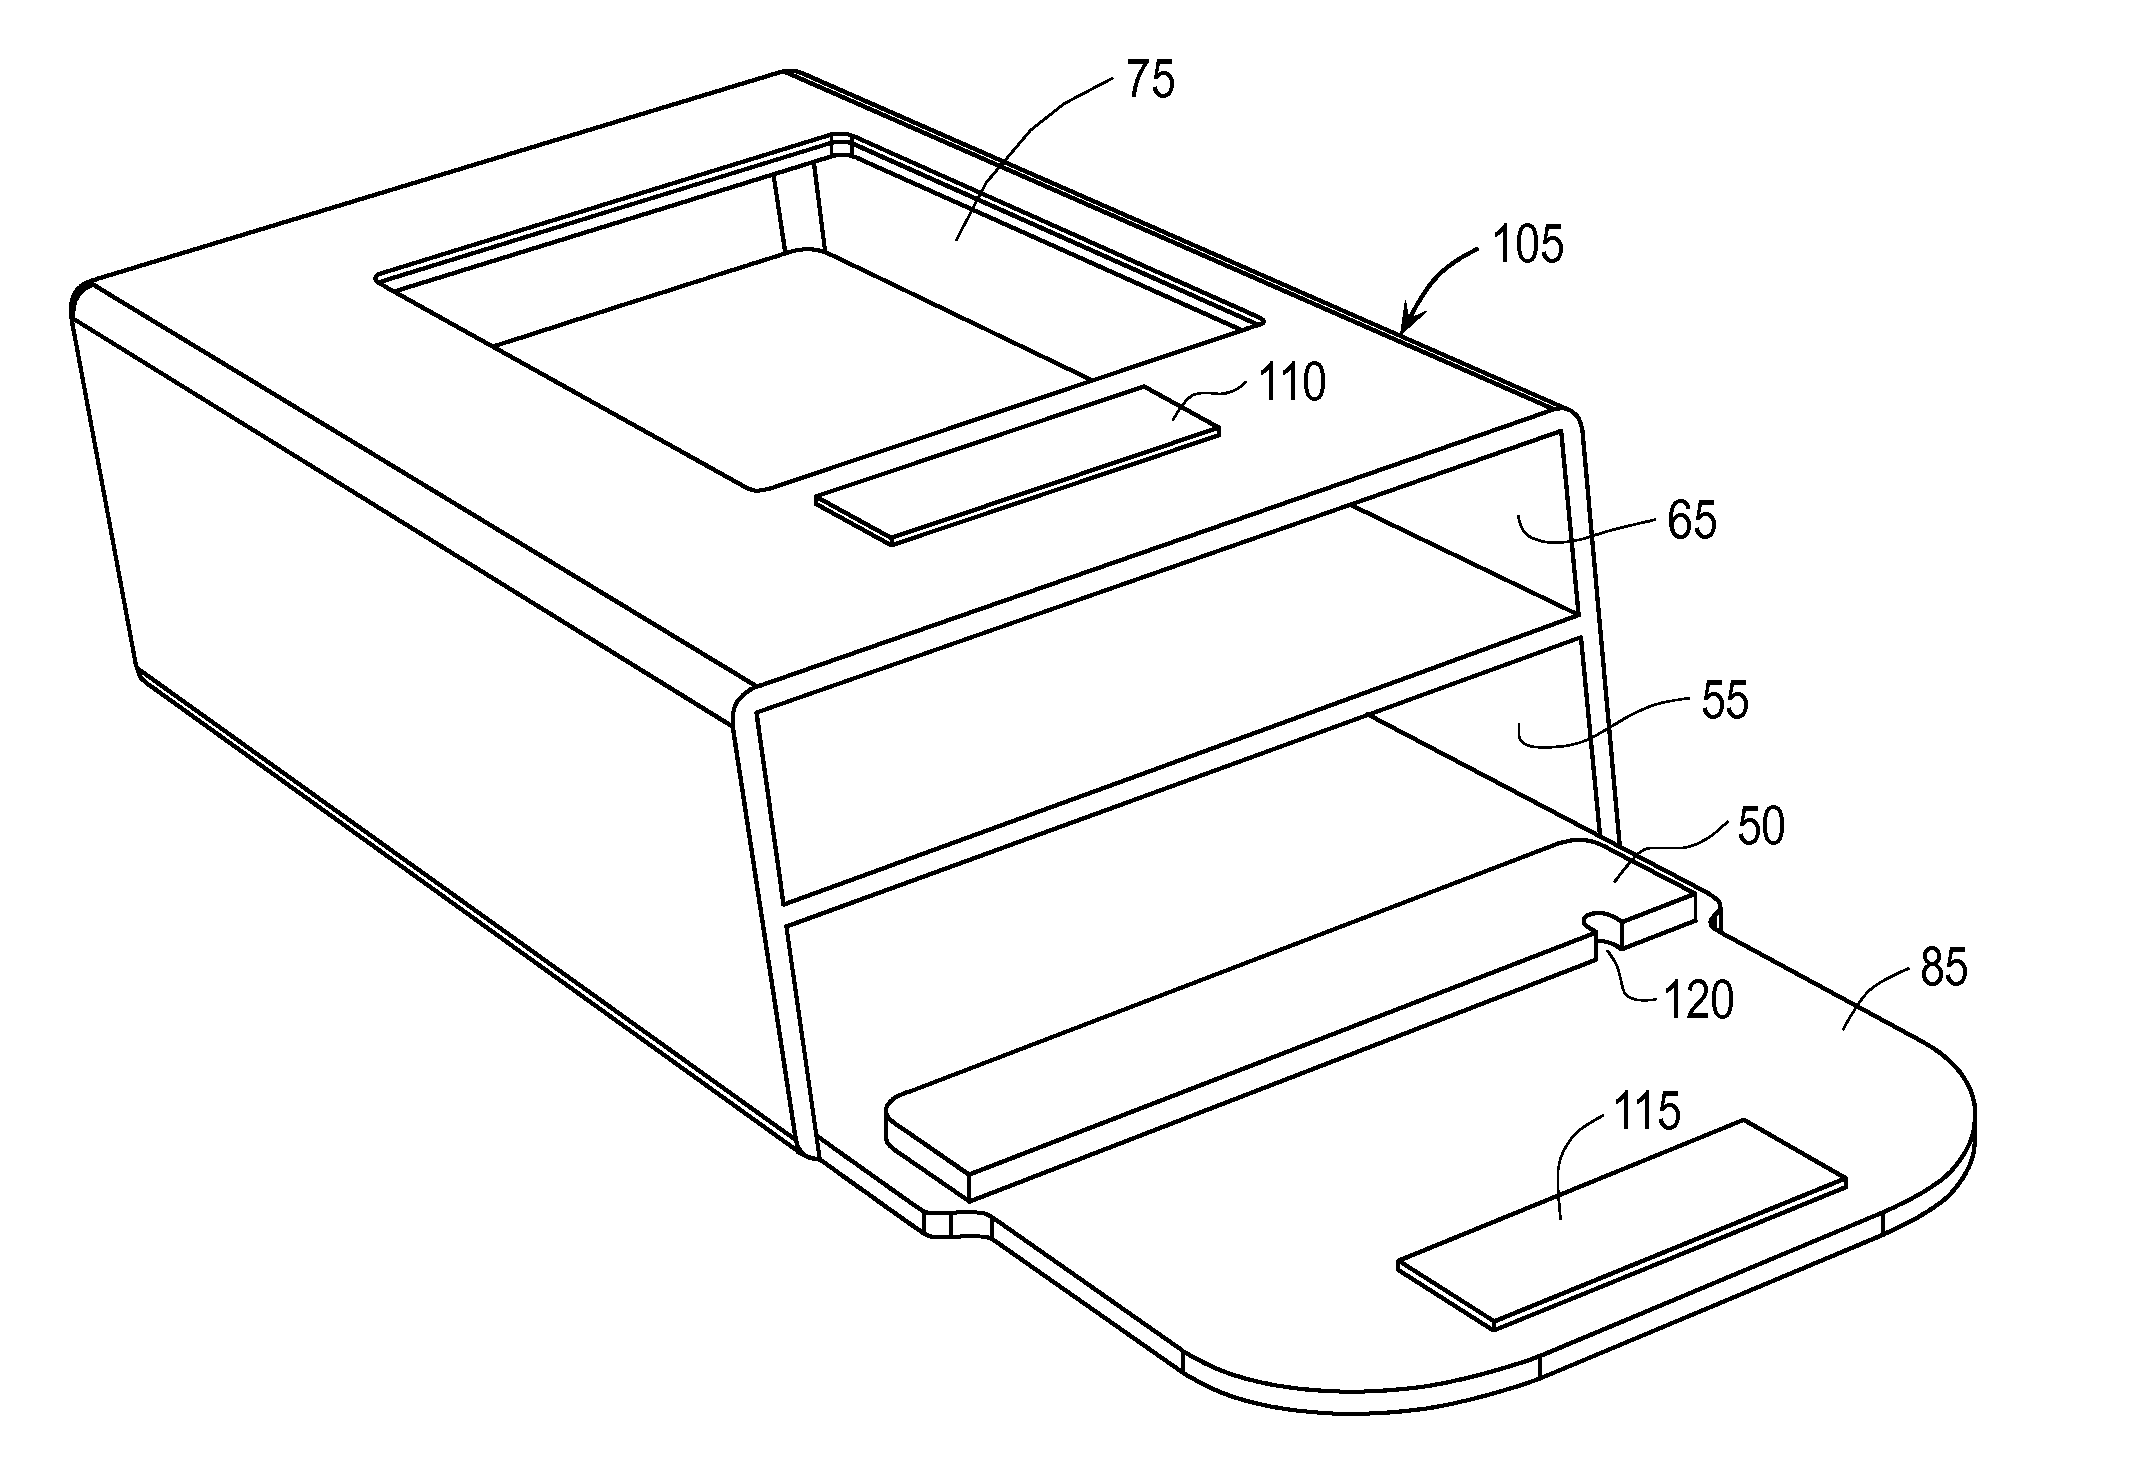 Configurable Shield for Hand-Held Electronic Device